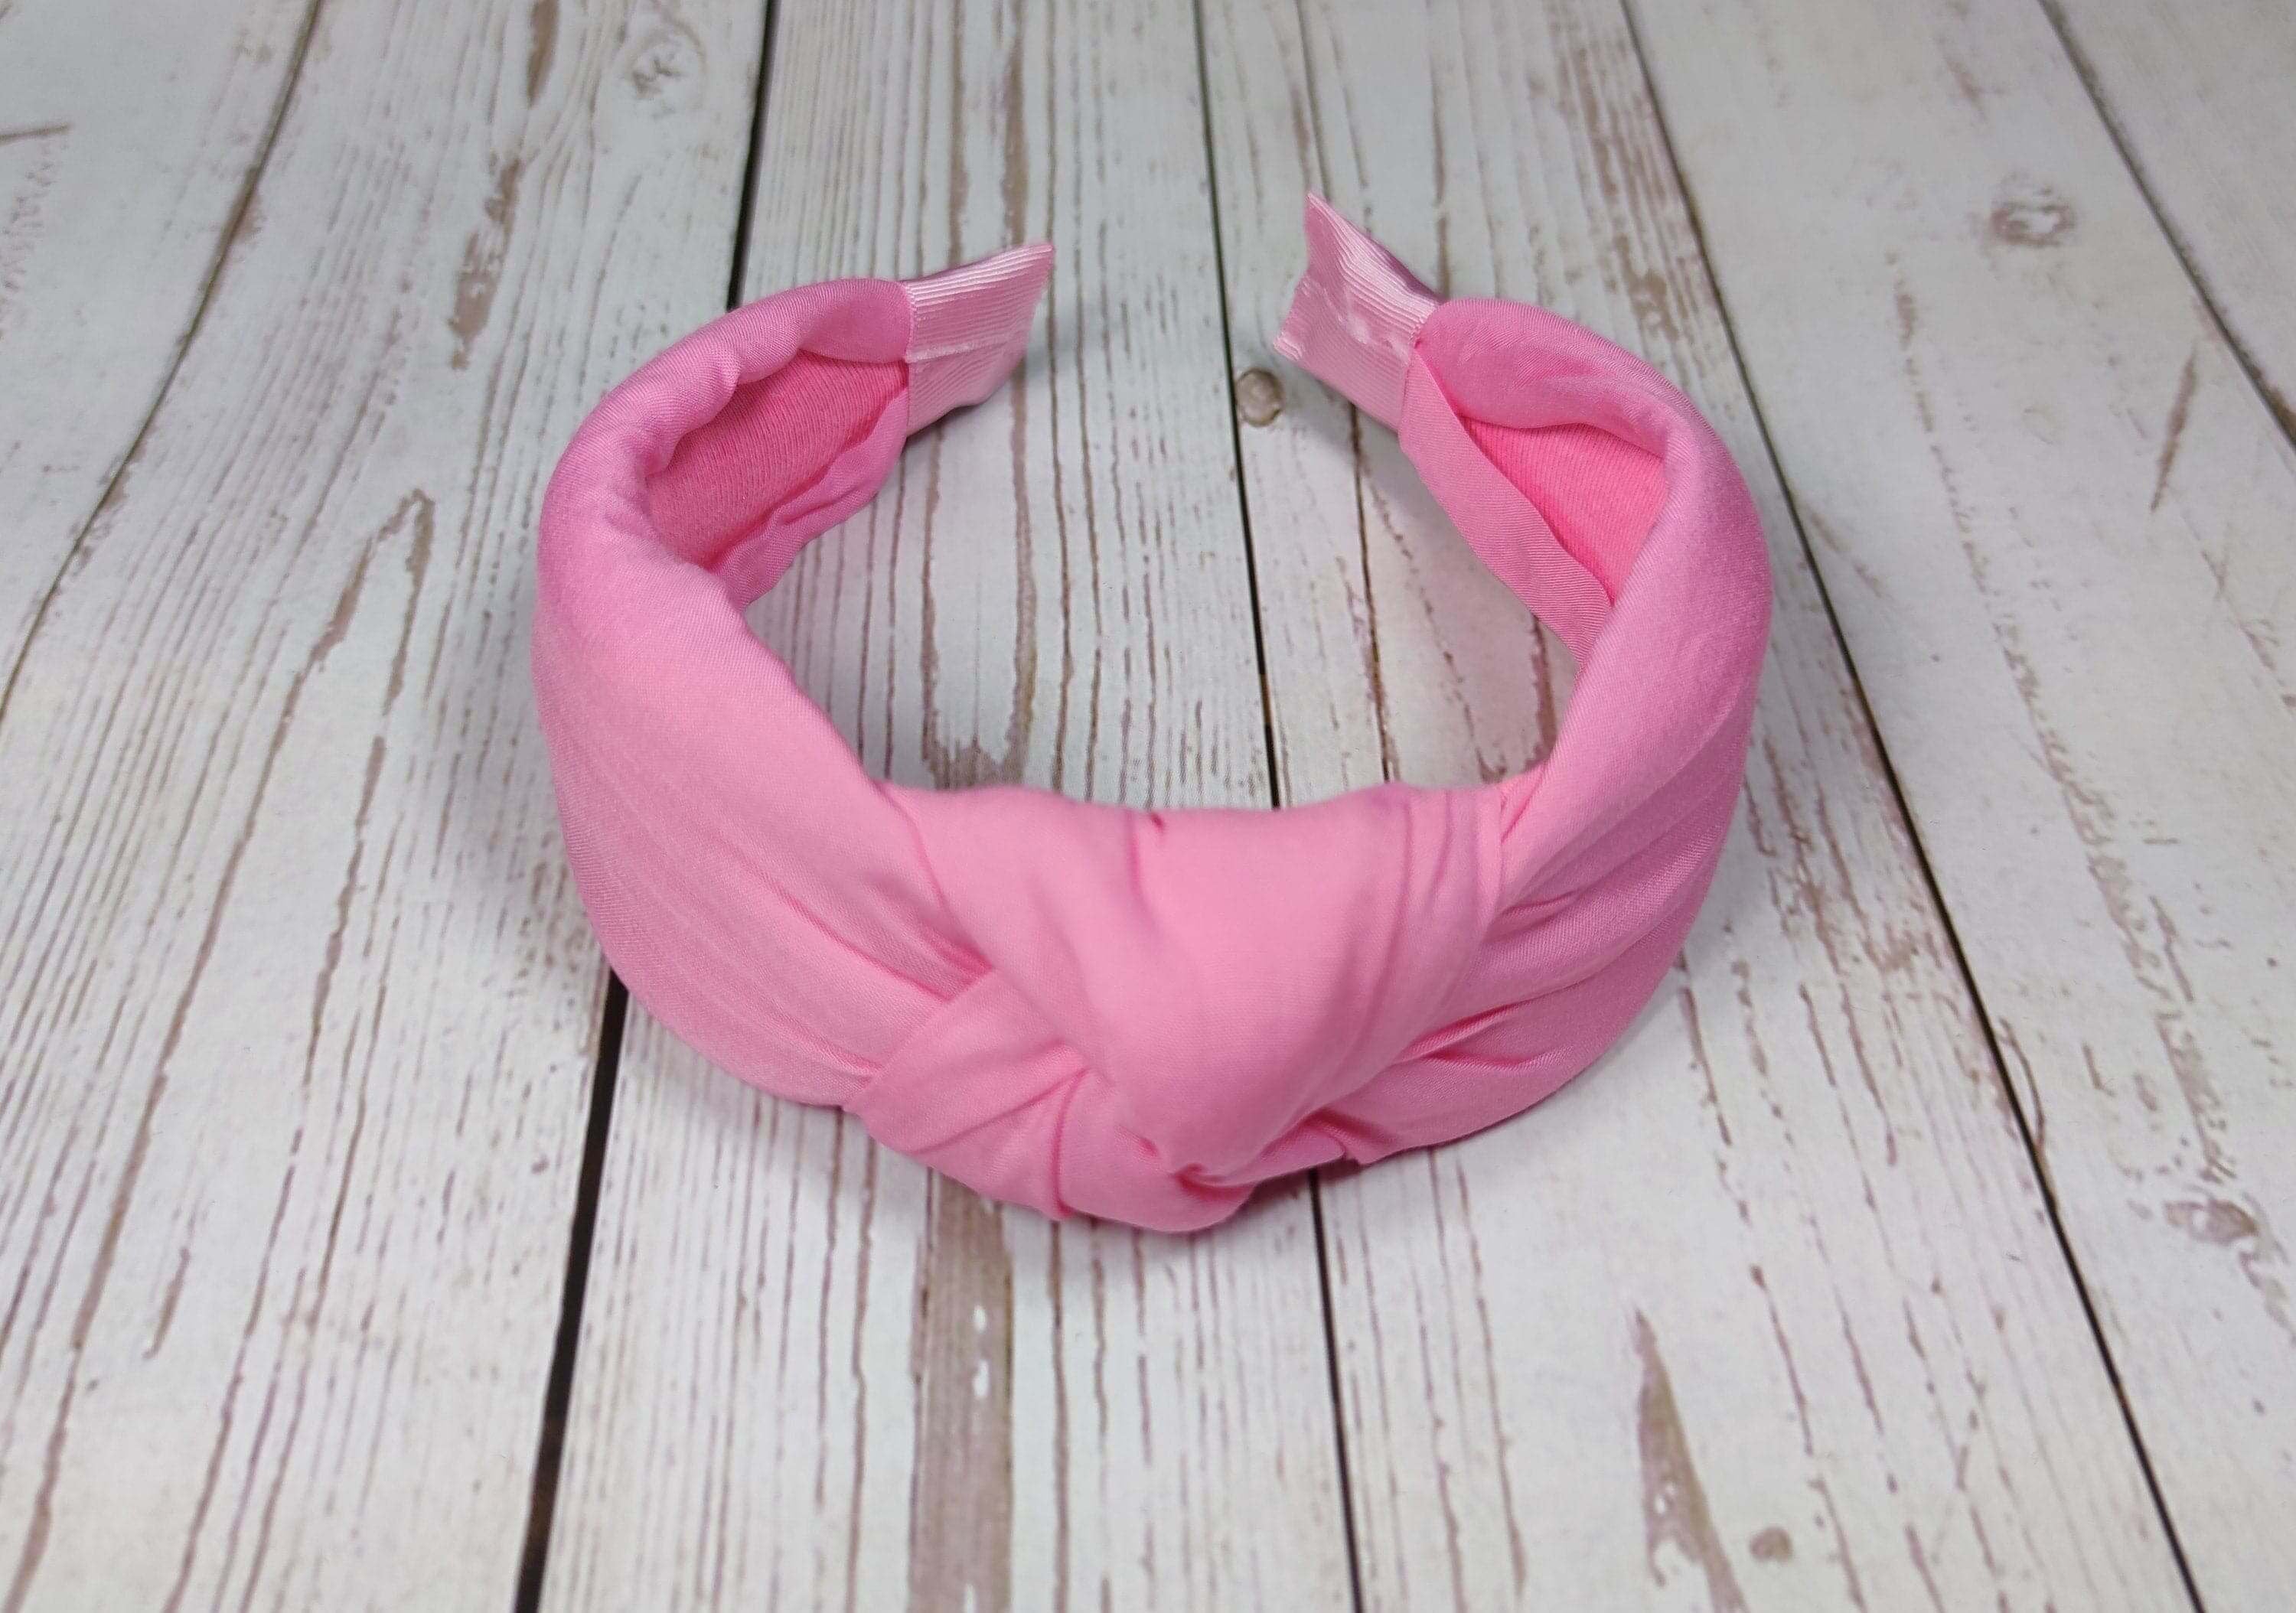 Made from soft and comfortable viscose crepe, these hair accessories will help you get that desired look. Comes in a variety of colors and styles